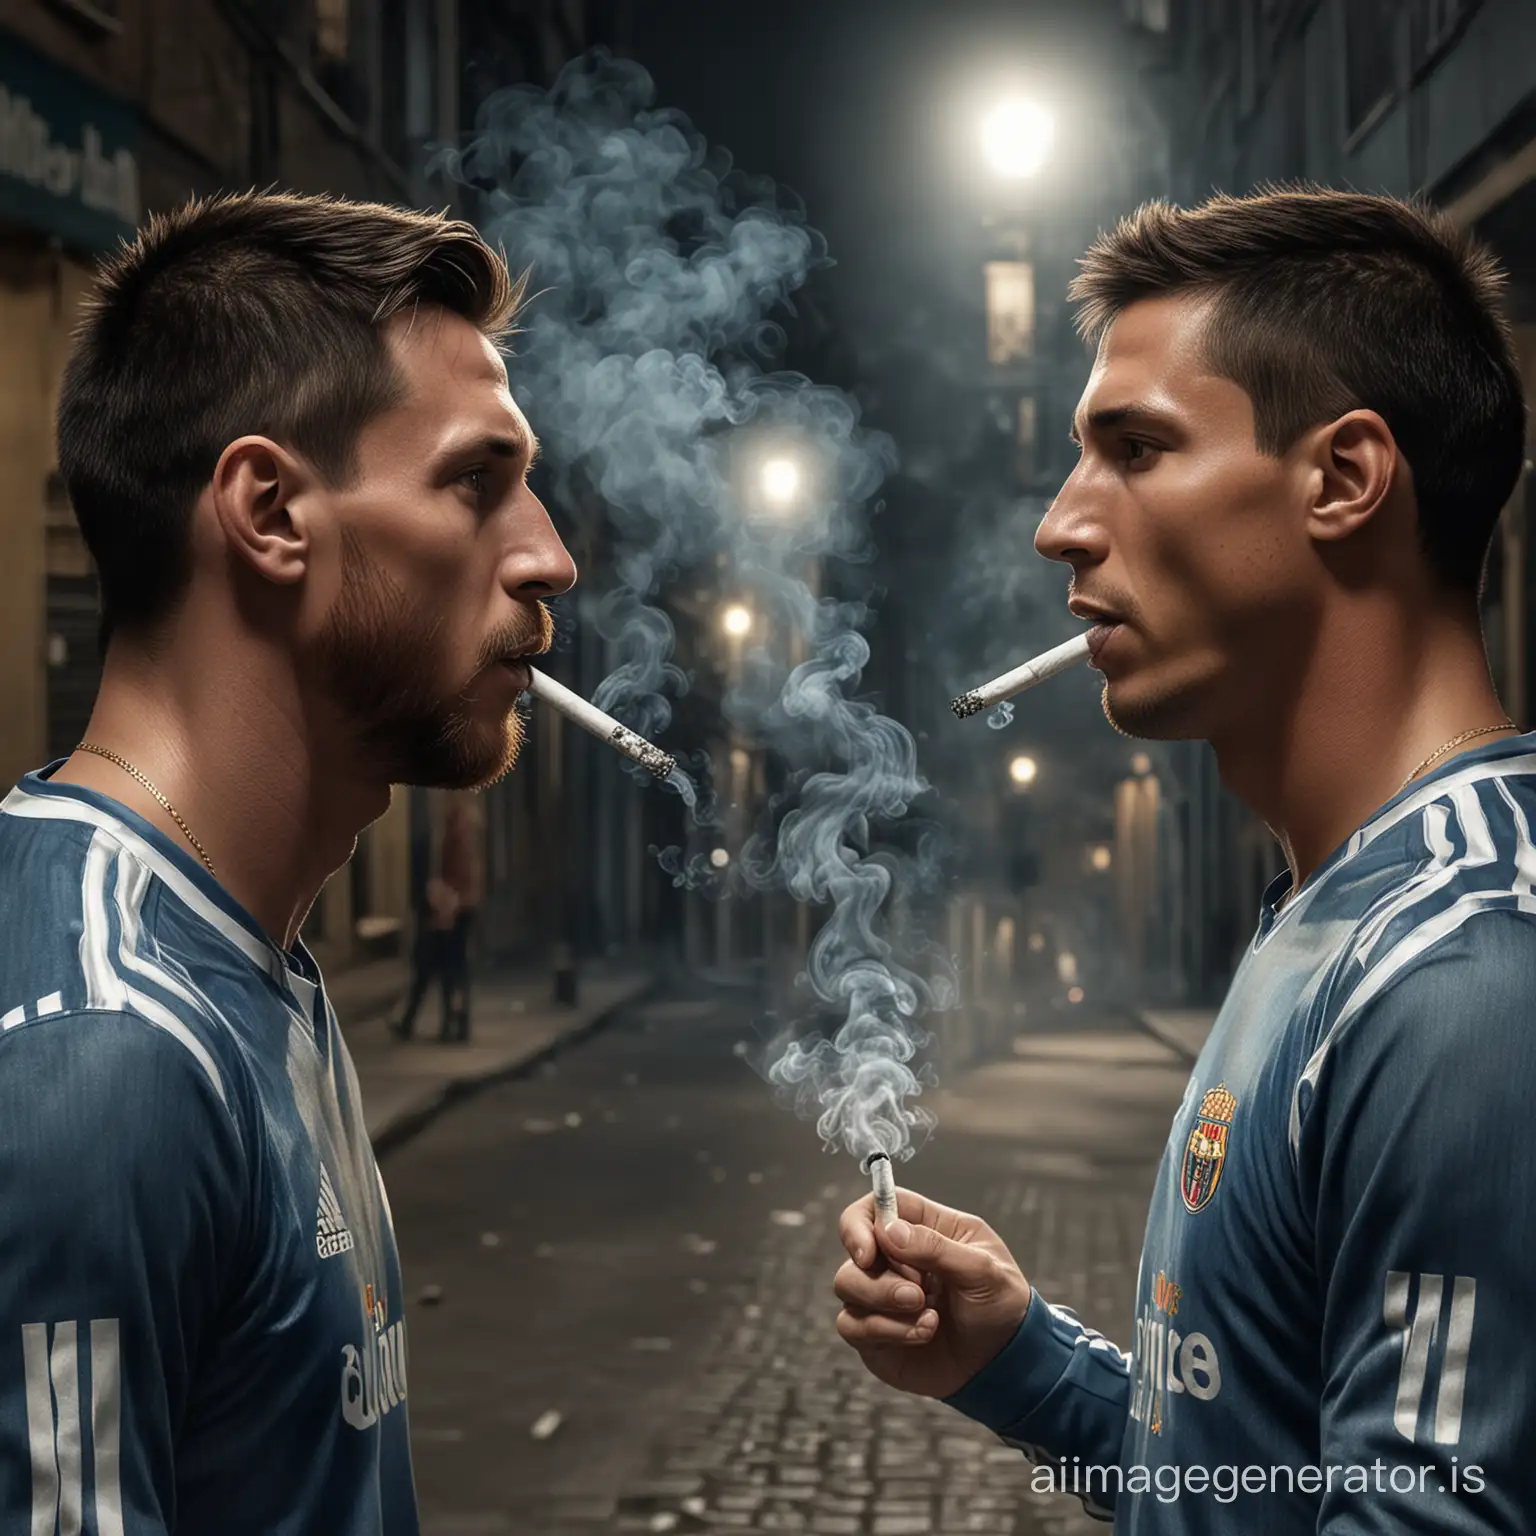 Messi and Ronaldo on the street at night puffing smoke from cigarette (realistic)